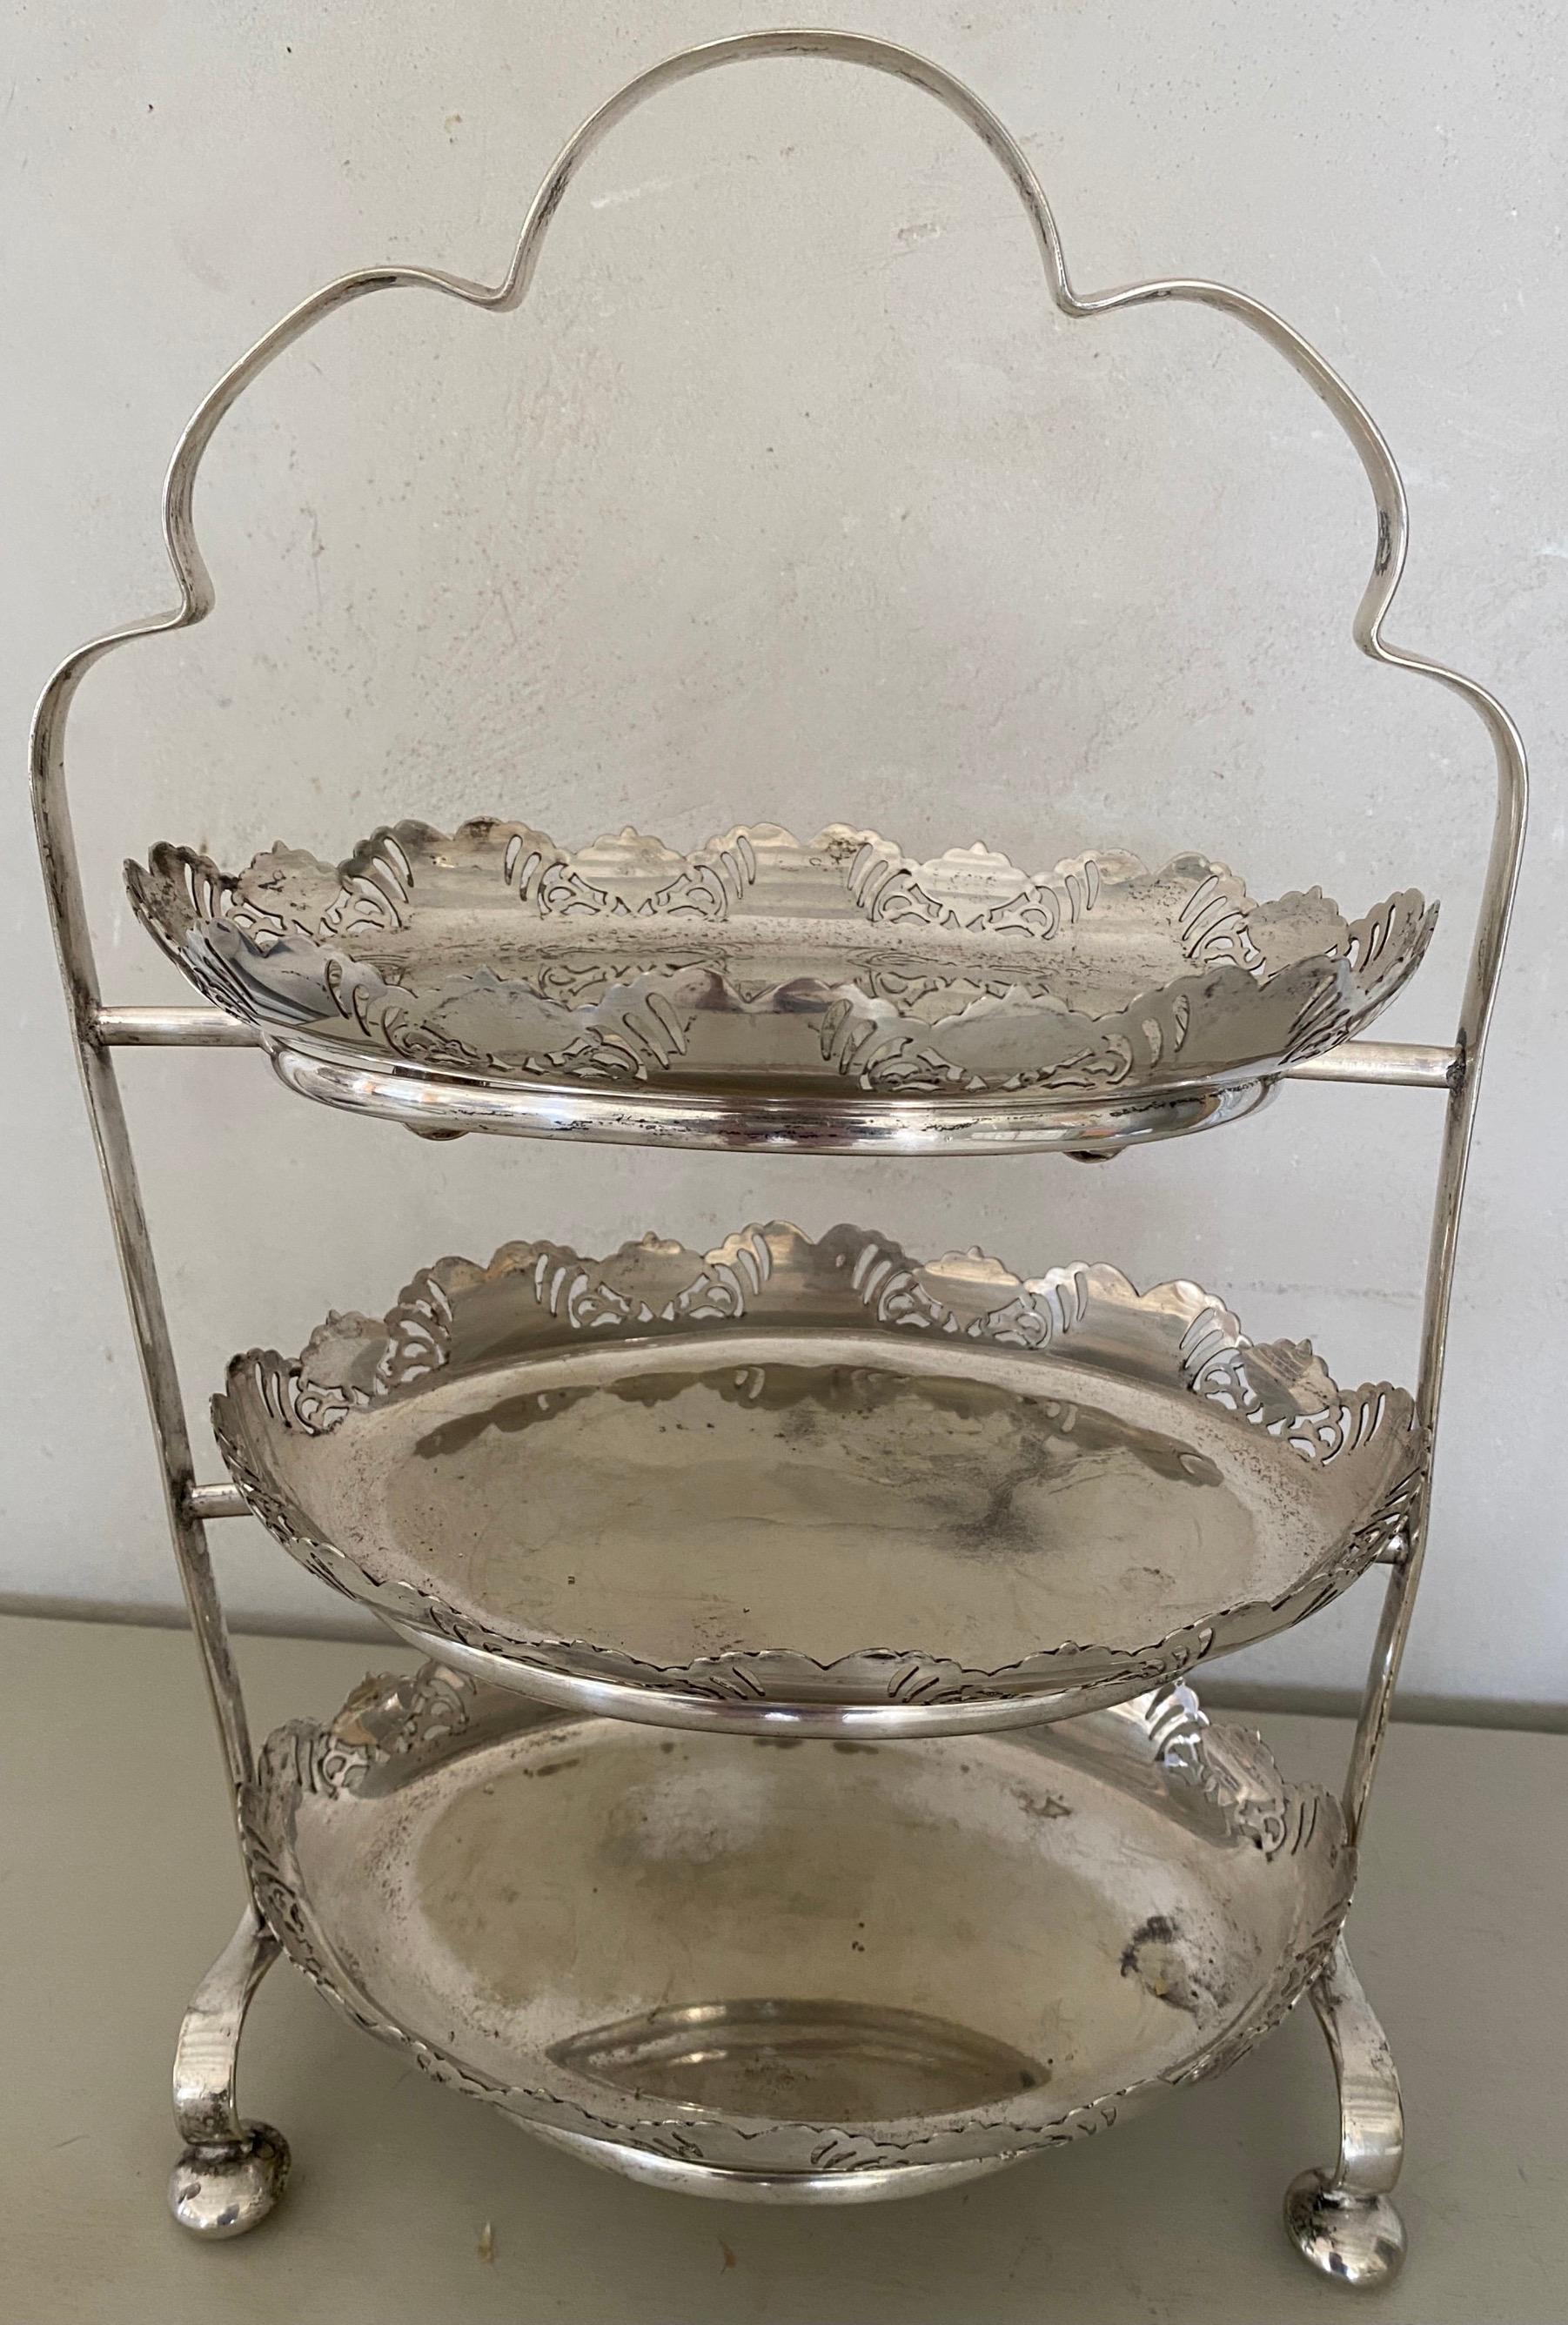 Antique Edwardian English Etagère Cake or Pastry Stand 4